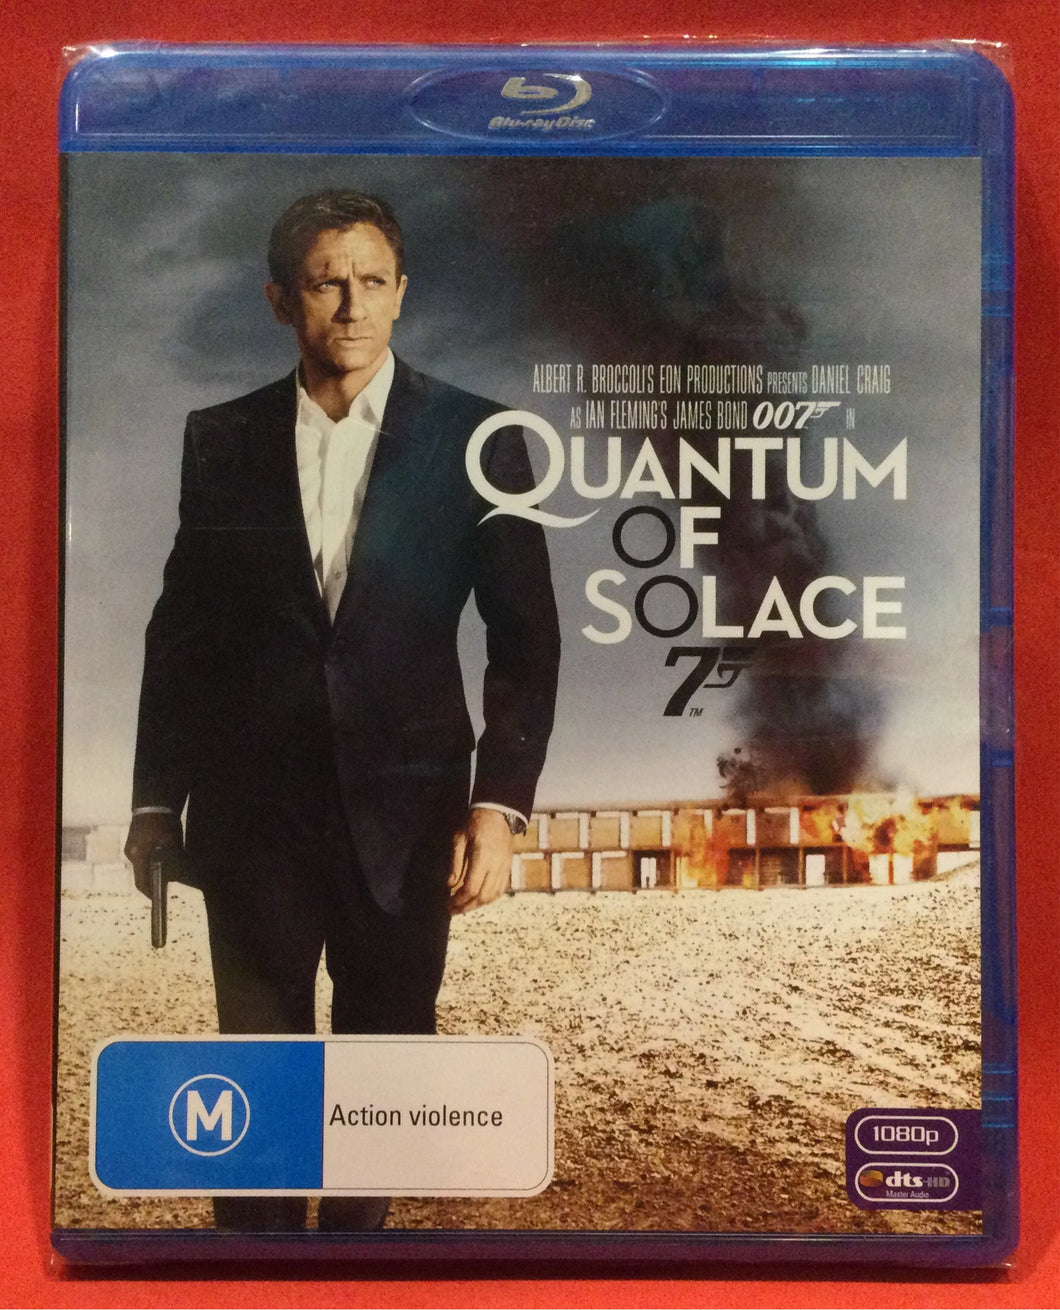 QUANTUM OF SOLACE - JAMES BOND 007 - BLU-RAY  (SEALED)